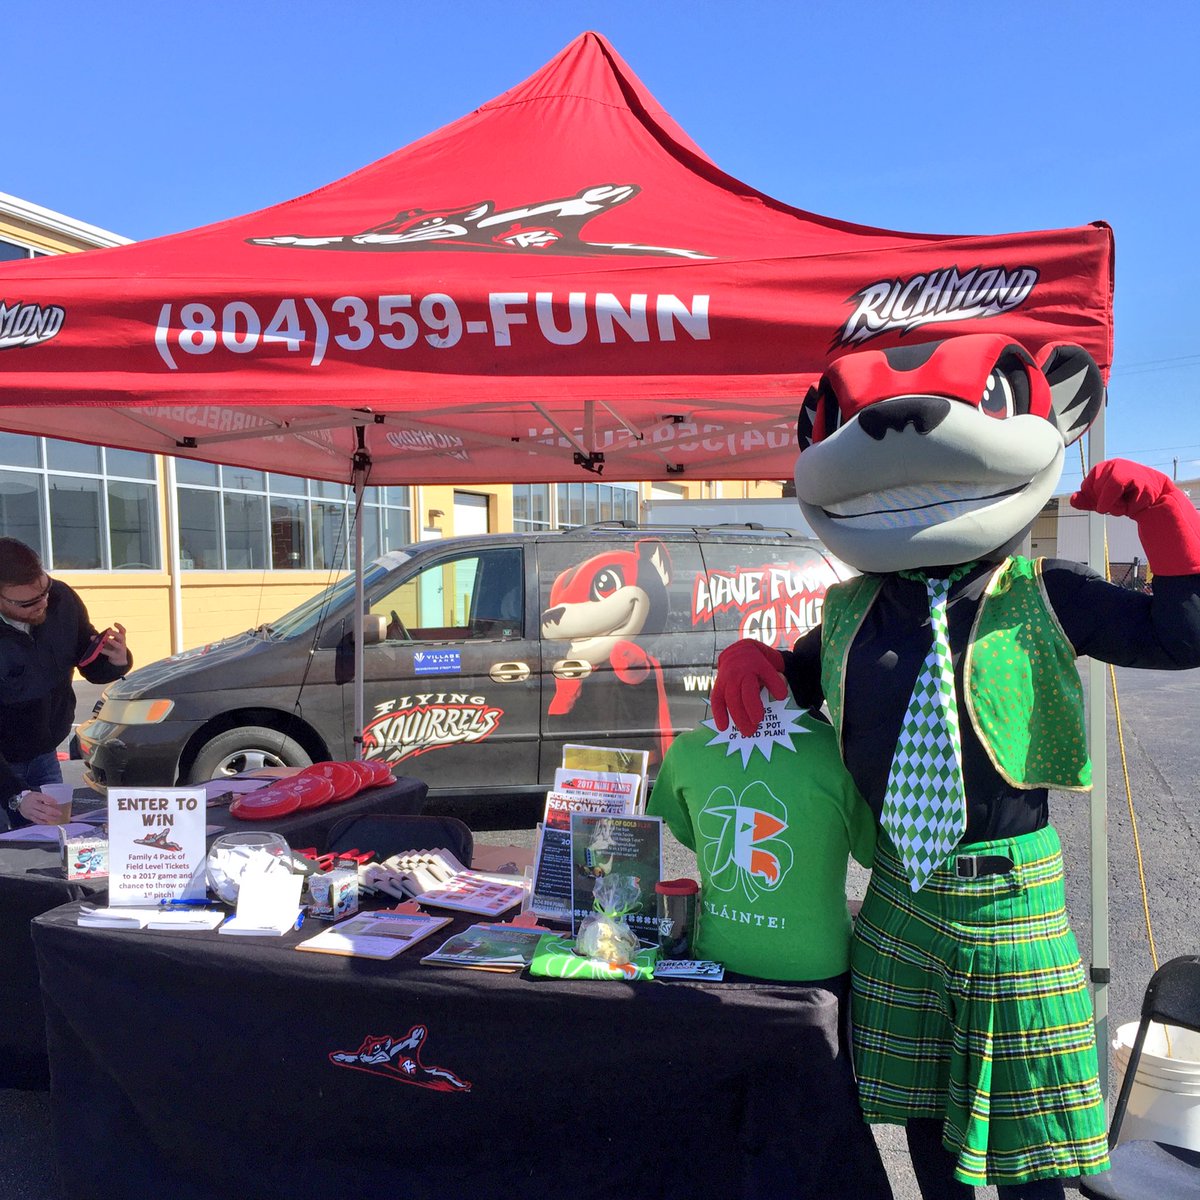 Richmond Flying Squirrels On Twitter Stop By And See Nutzy At